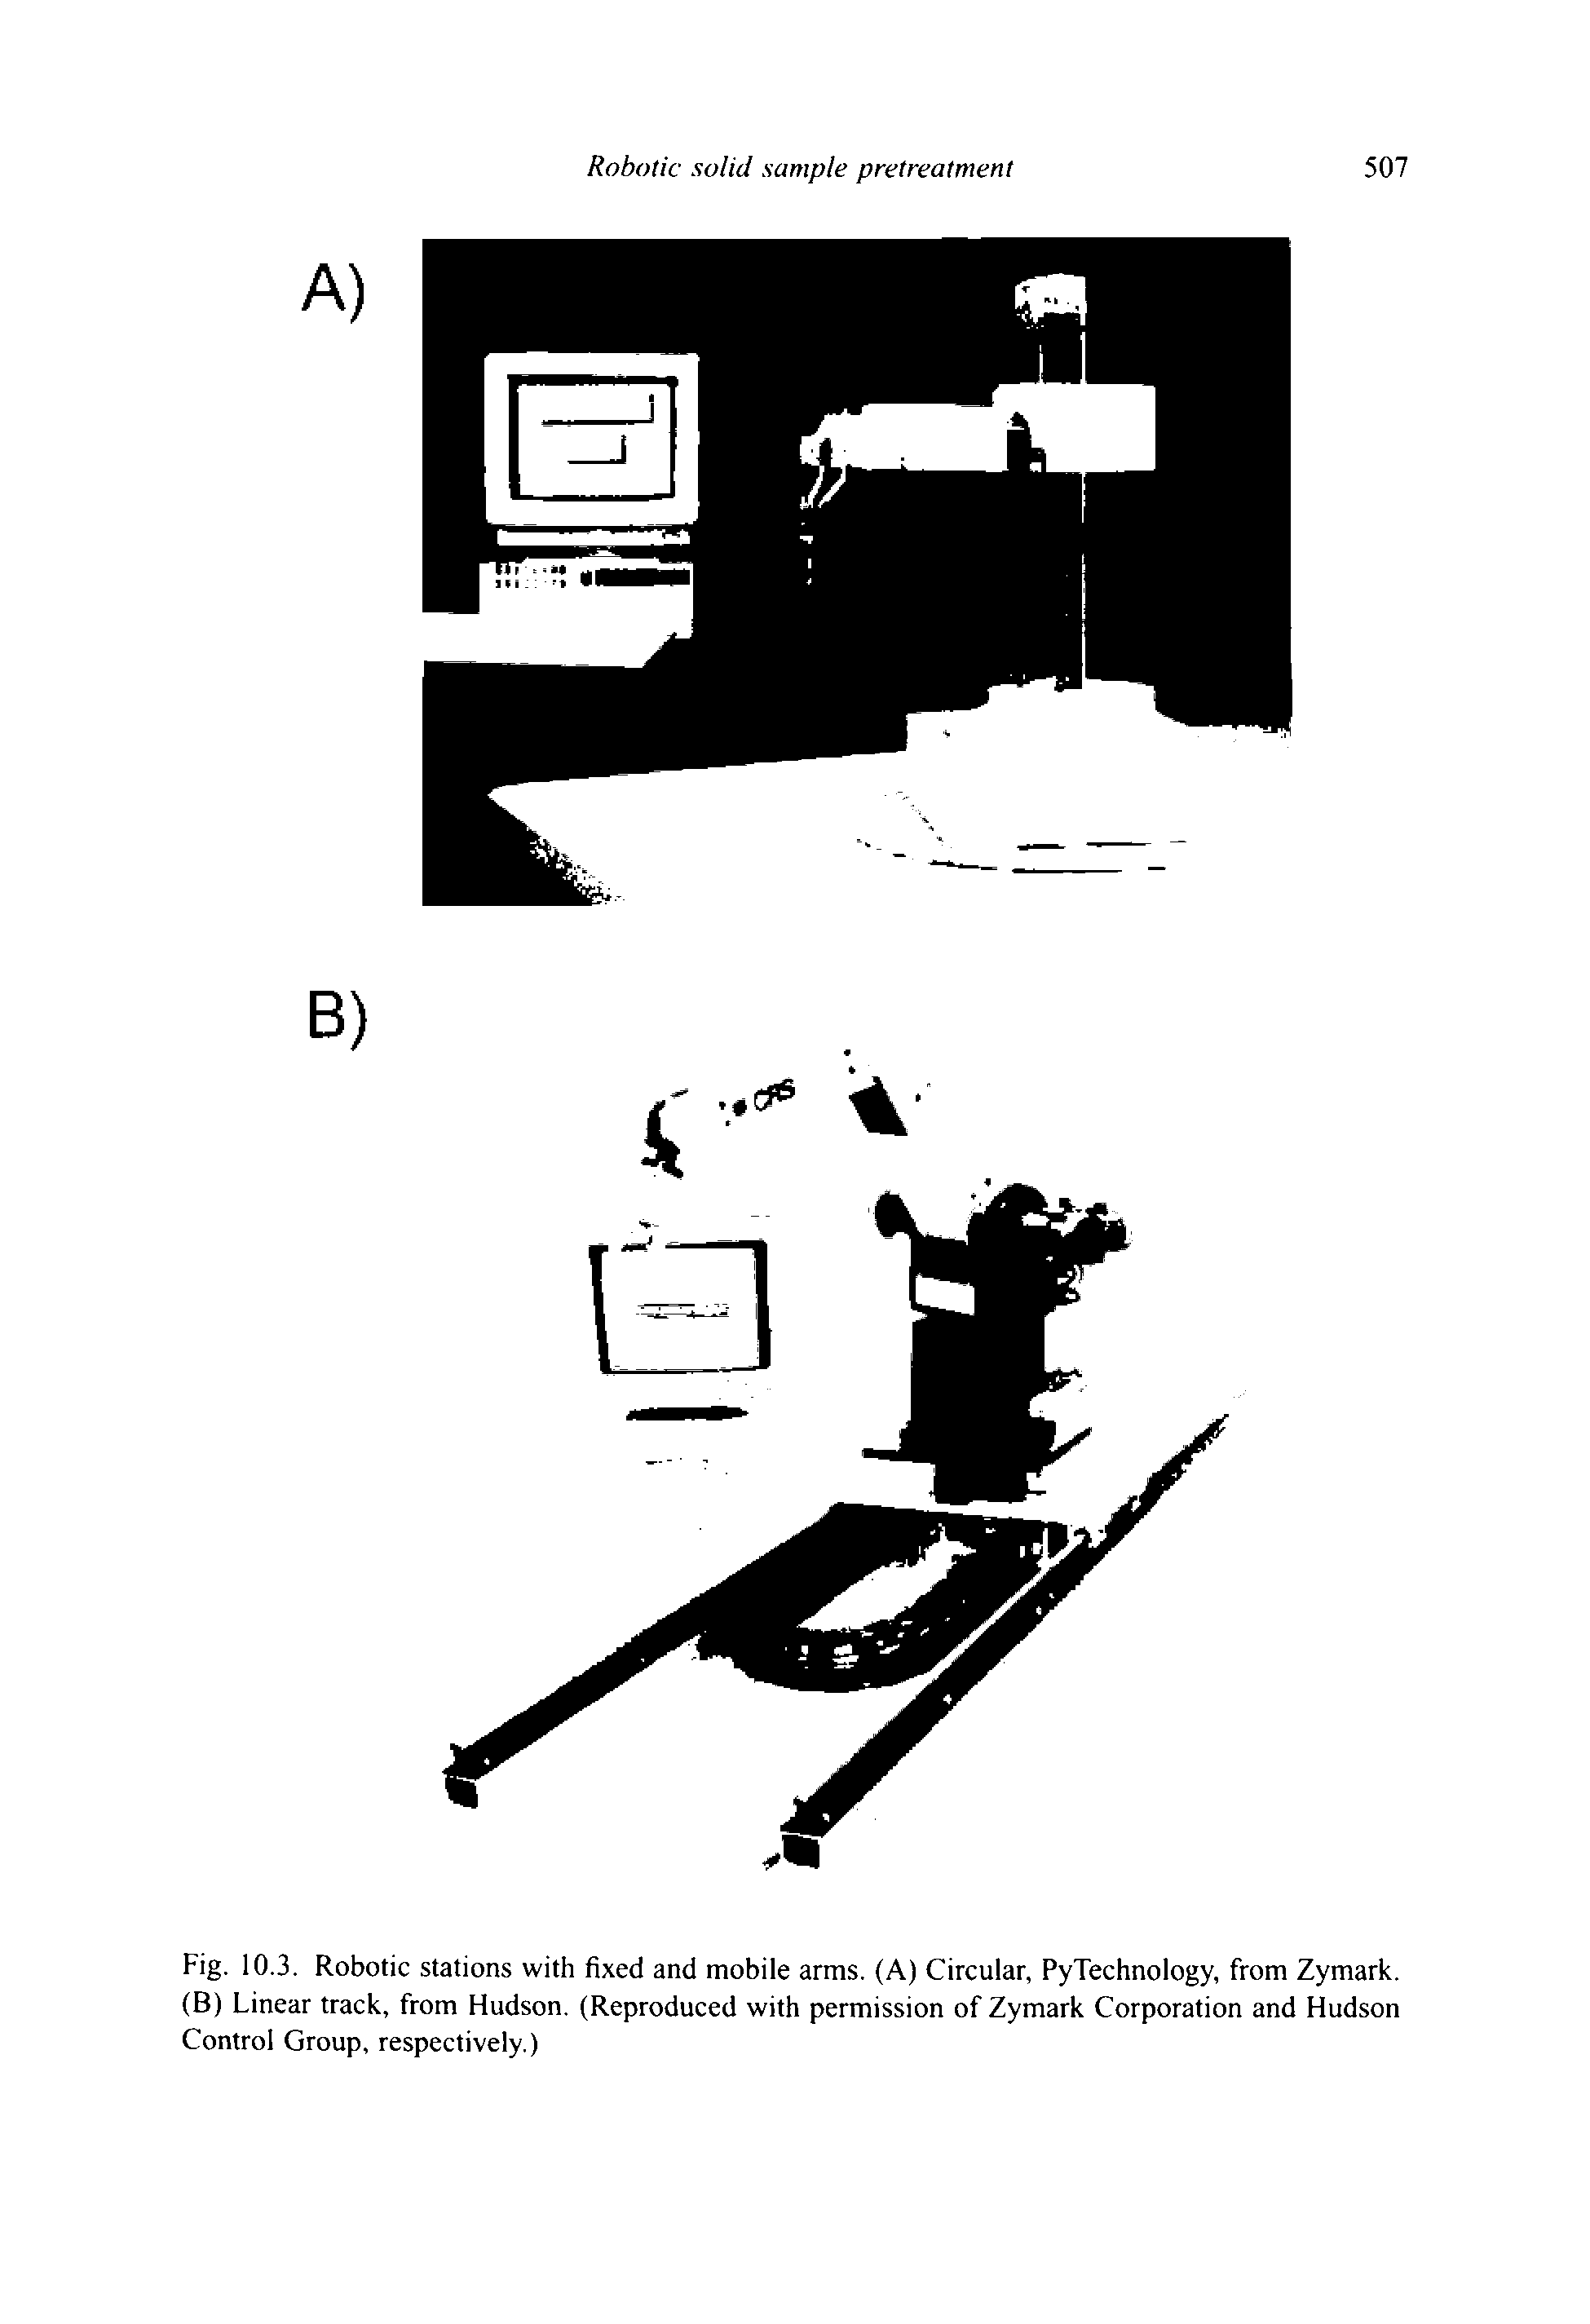 Fig. 10.3. Robotic stations with fixed and mobile arms. (A) Circular, PyTechnology, from Zymark. (B) Linear track, from Hudson. (Reproduced with permission of Zymark Corporation and Hudson Control Group, respectively.)...